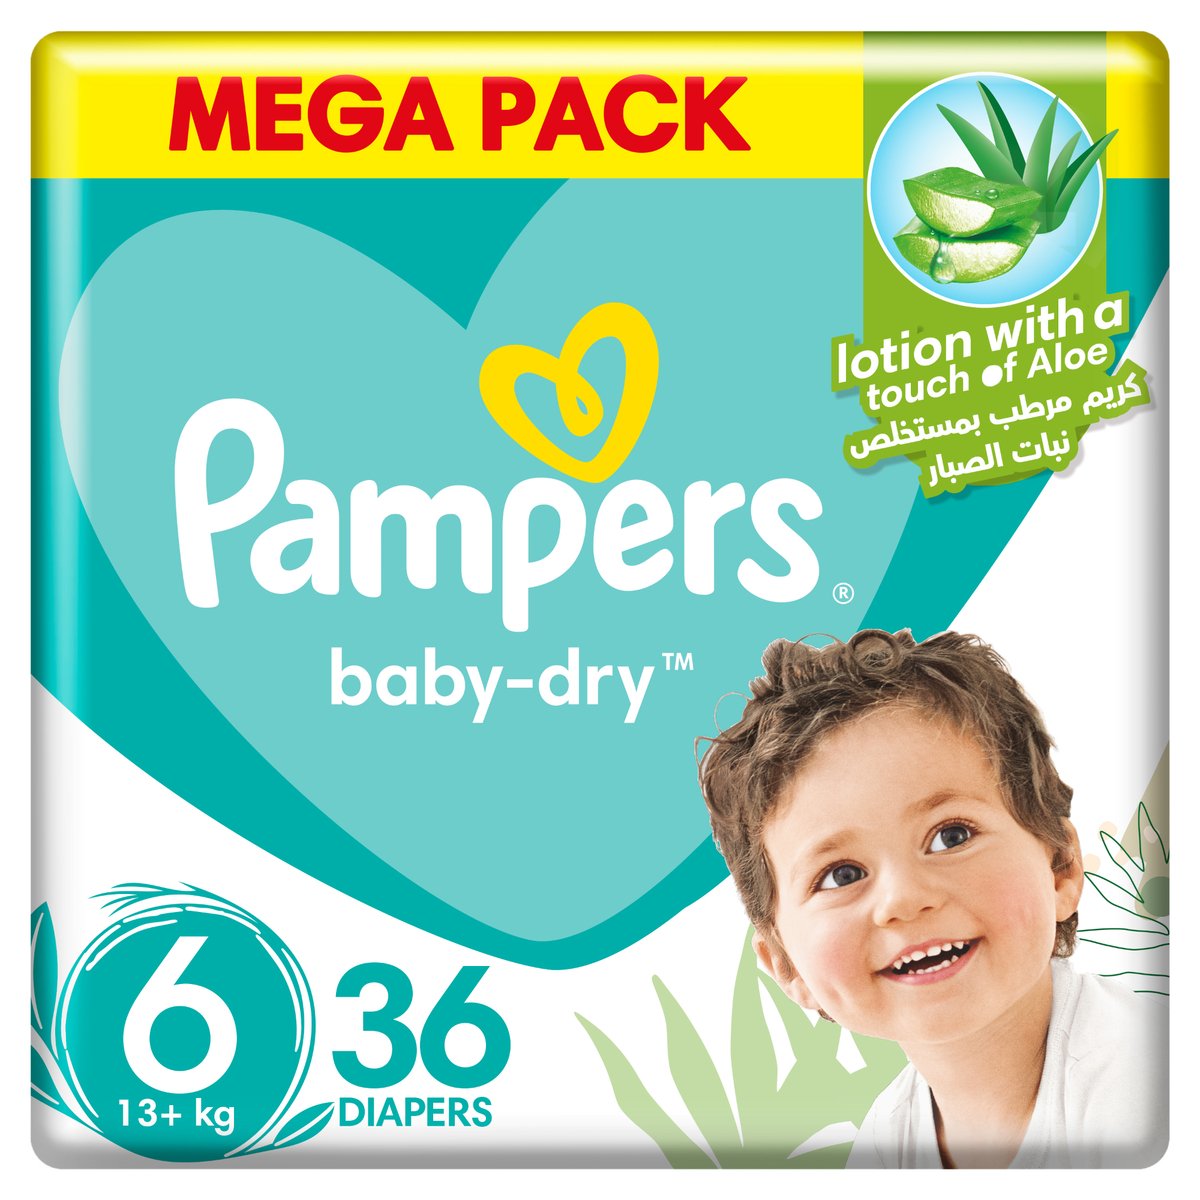 Buy Pampers Baby-Dry Taped Diapers with Aloe Vera Lotion, Leakage Protection, Size 6, 13+kg, 36 pcs Online at Best Price | Baby Nappies | Lulu UAE in Kuwait